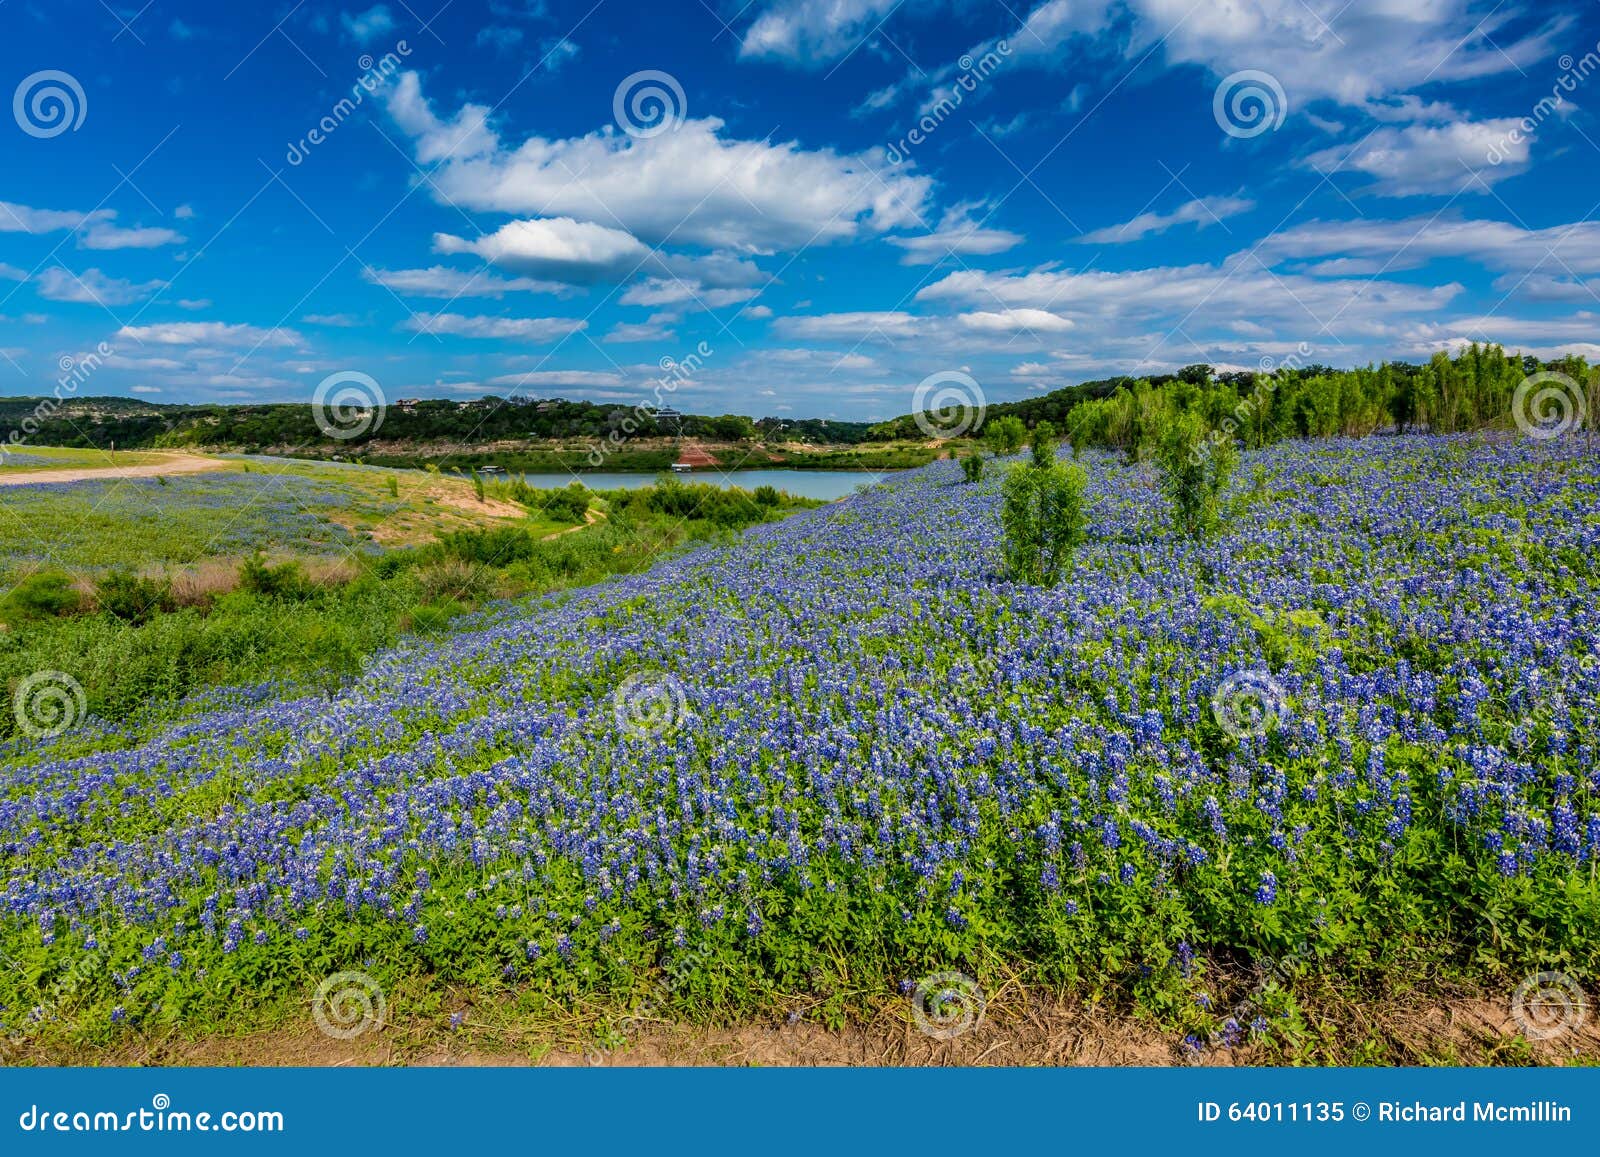 wide angle view of famous texas bluebonnet (lupinus texensis) wi